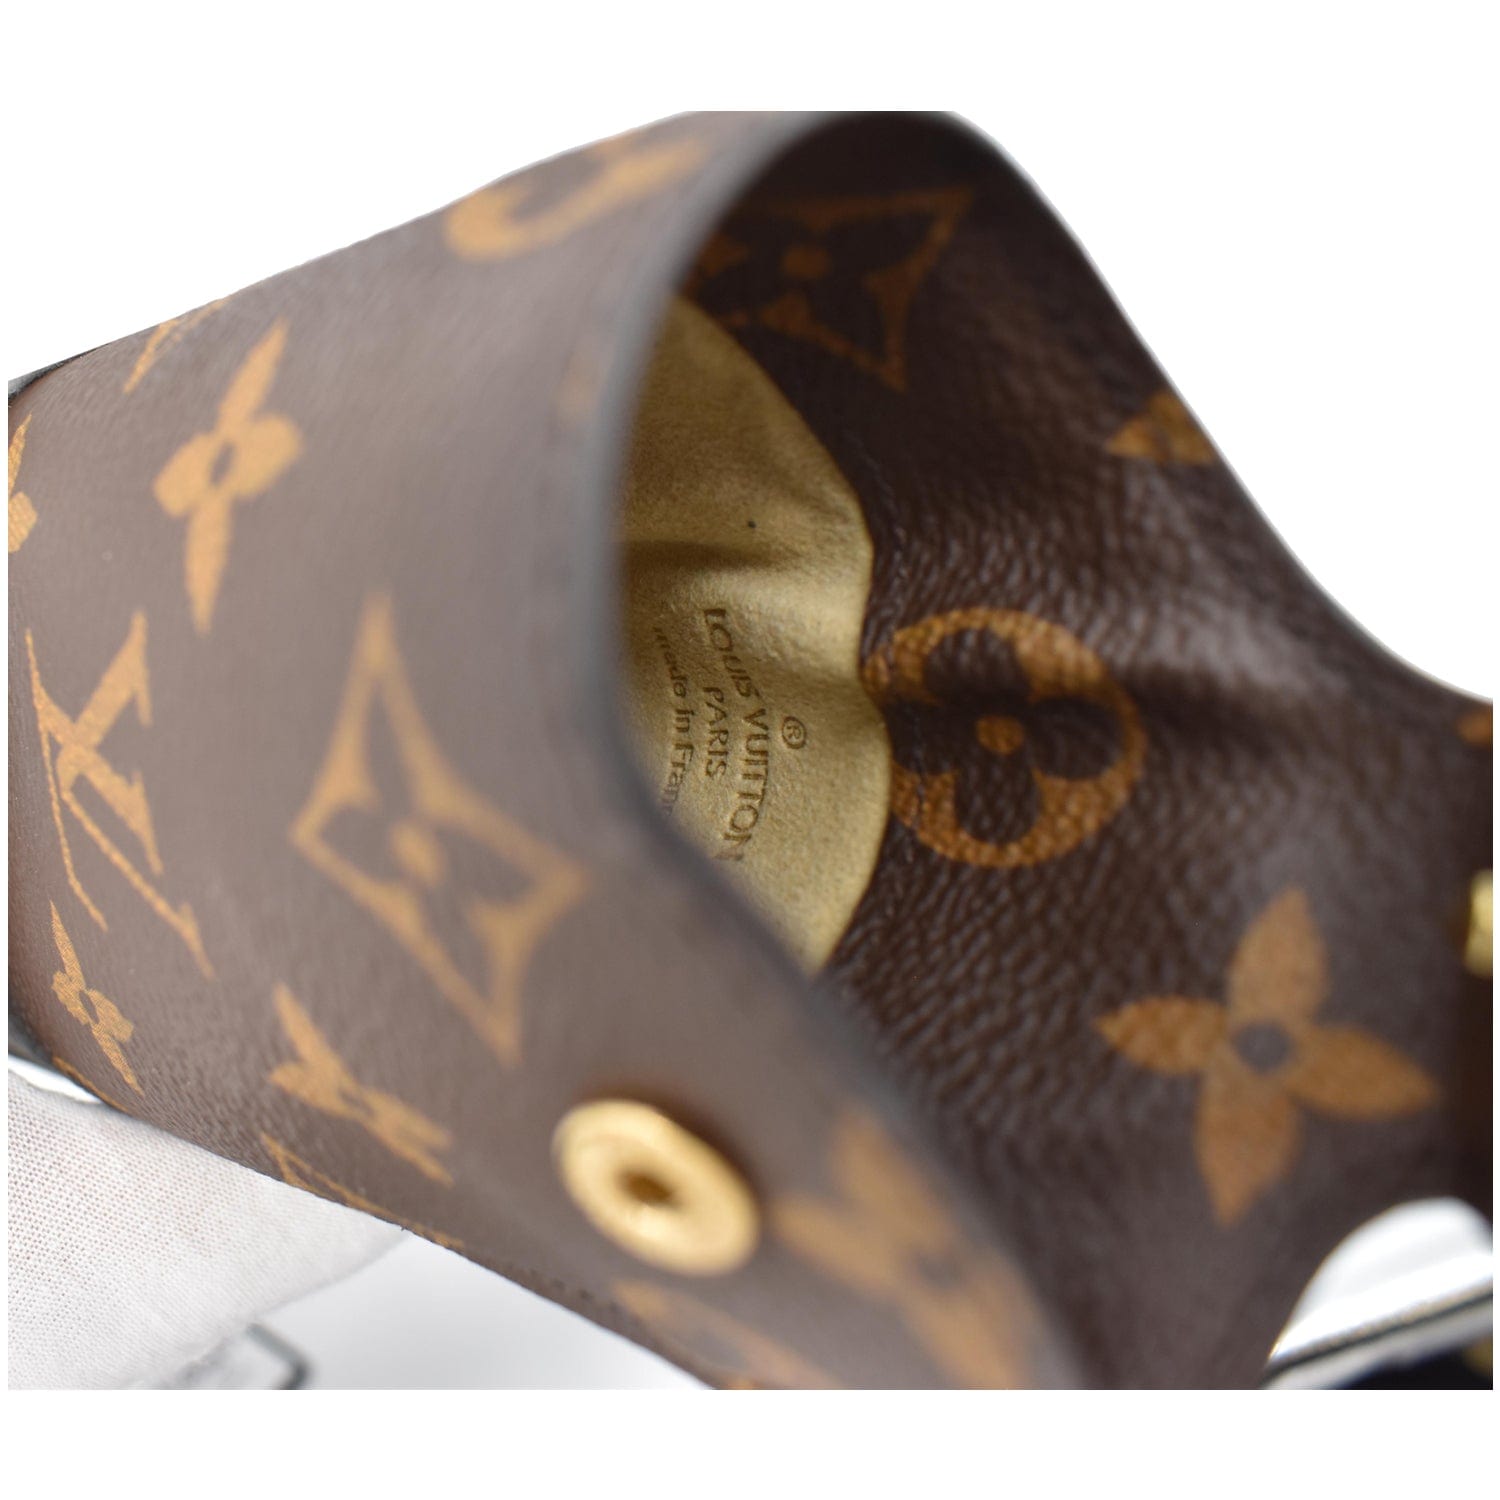 GM Sunglasses Case Monogram Other Canvas - Sport and Lifestyle GI0764